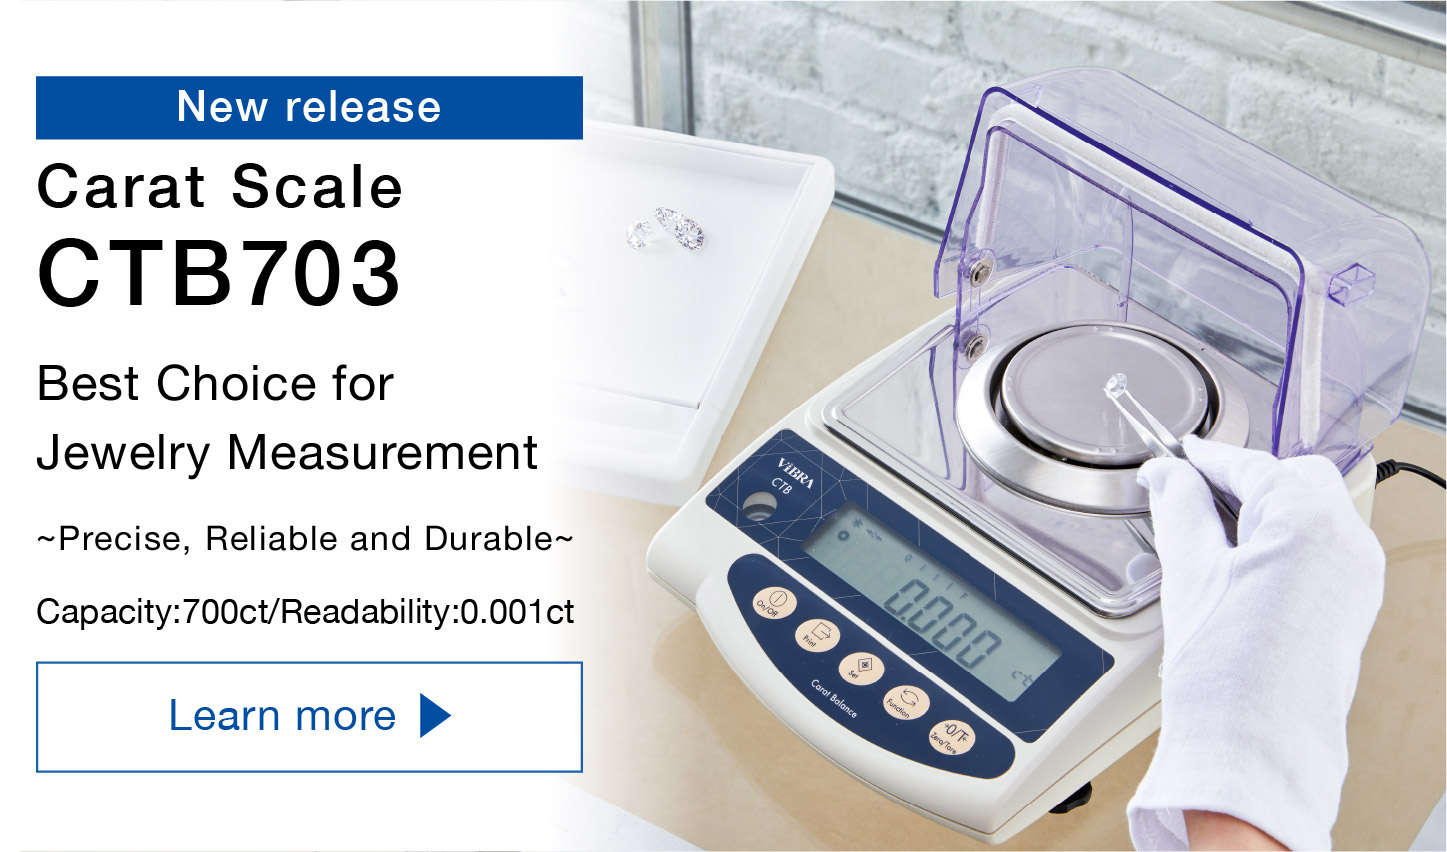 New release Carat Scale CTB703